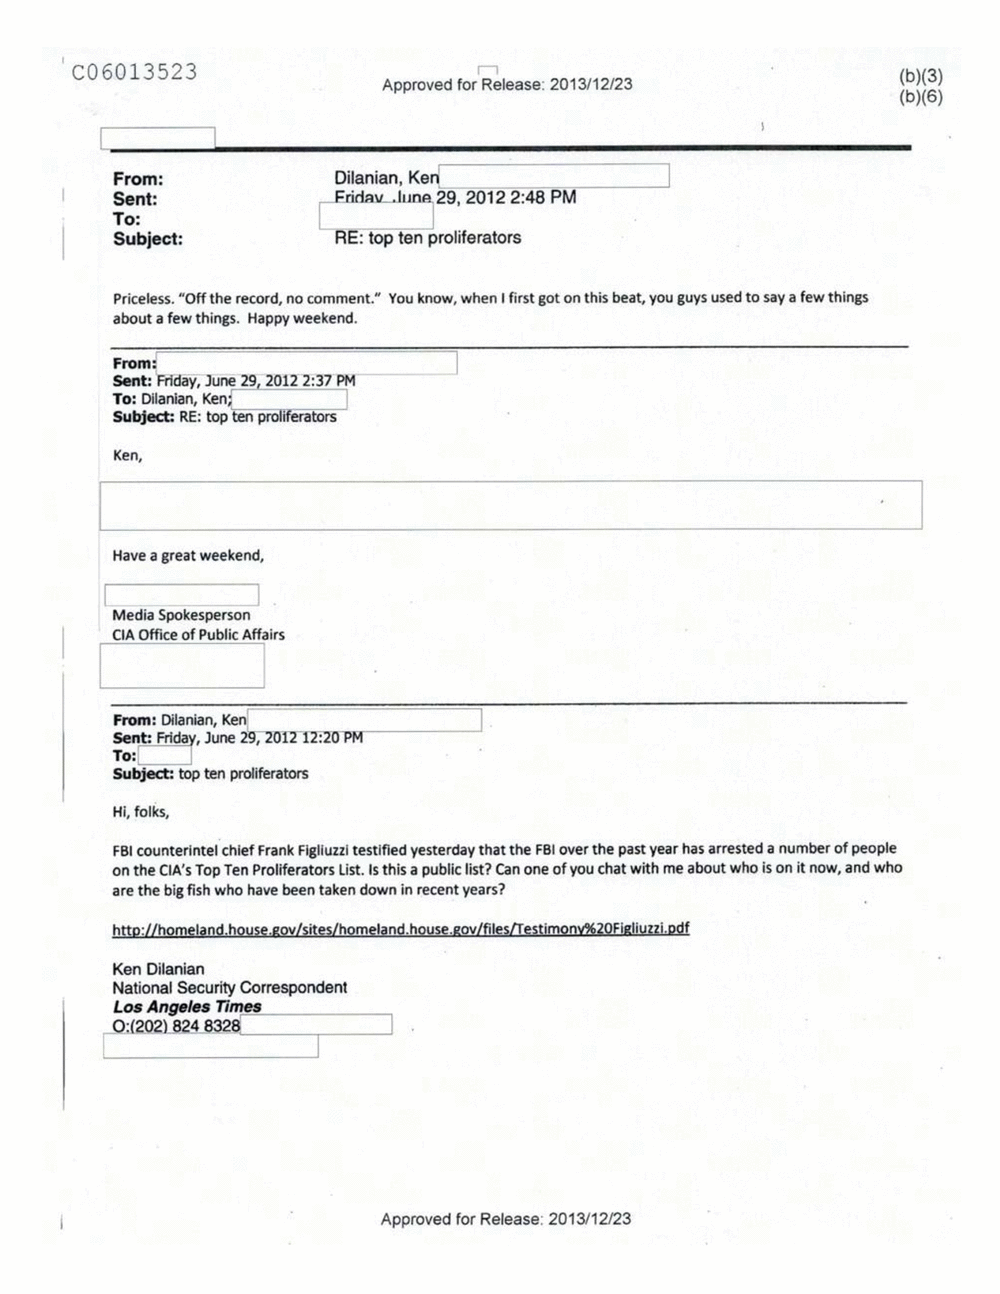 Page 363 from Email Correspondence Between Reporters and CIA Flacks